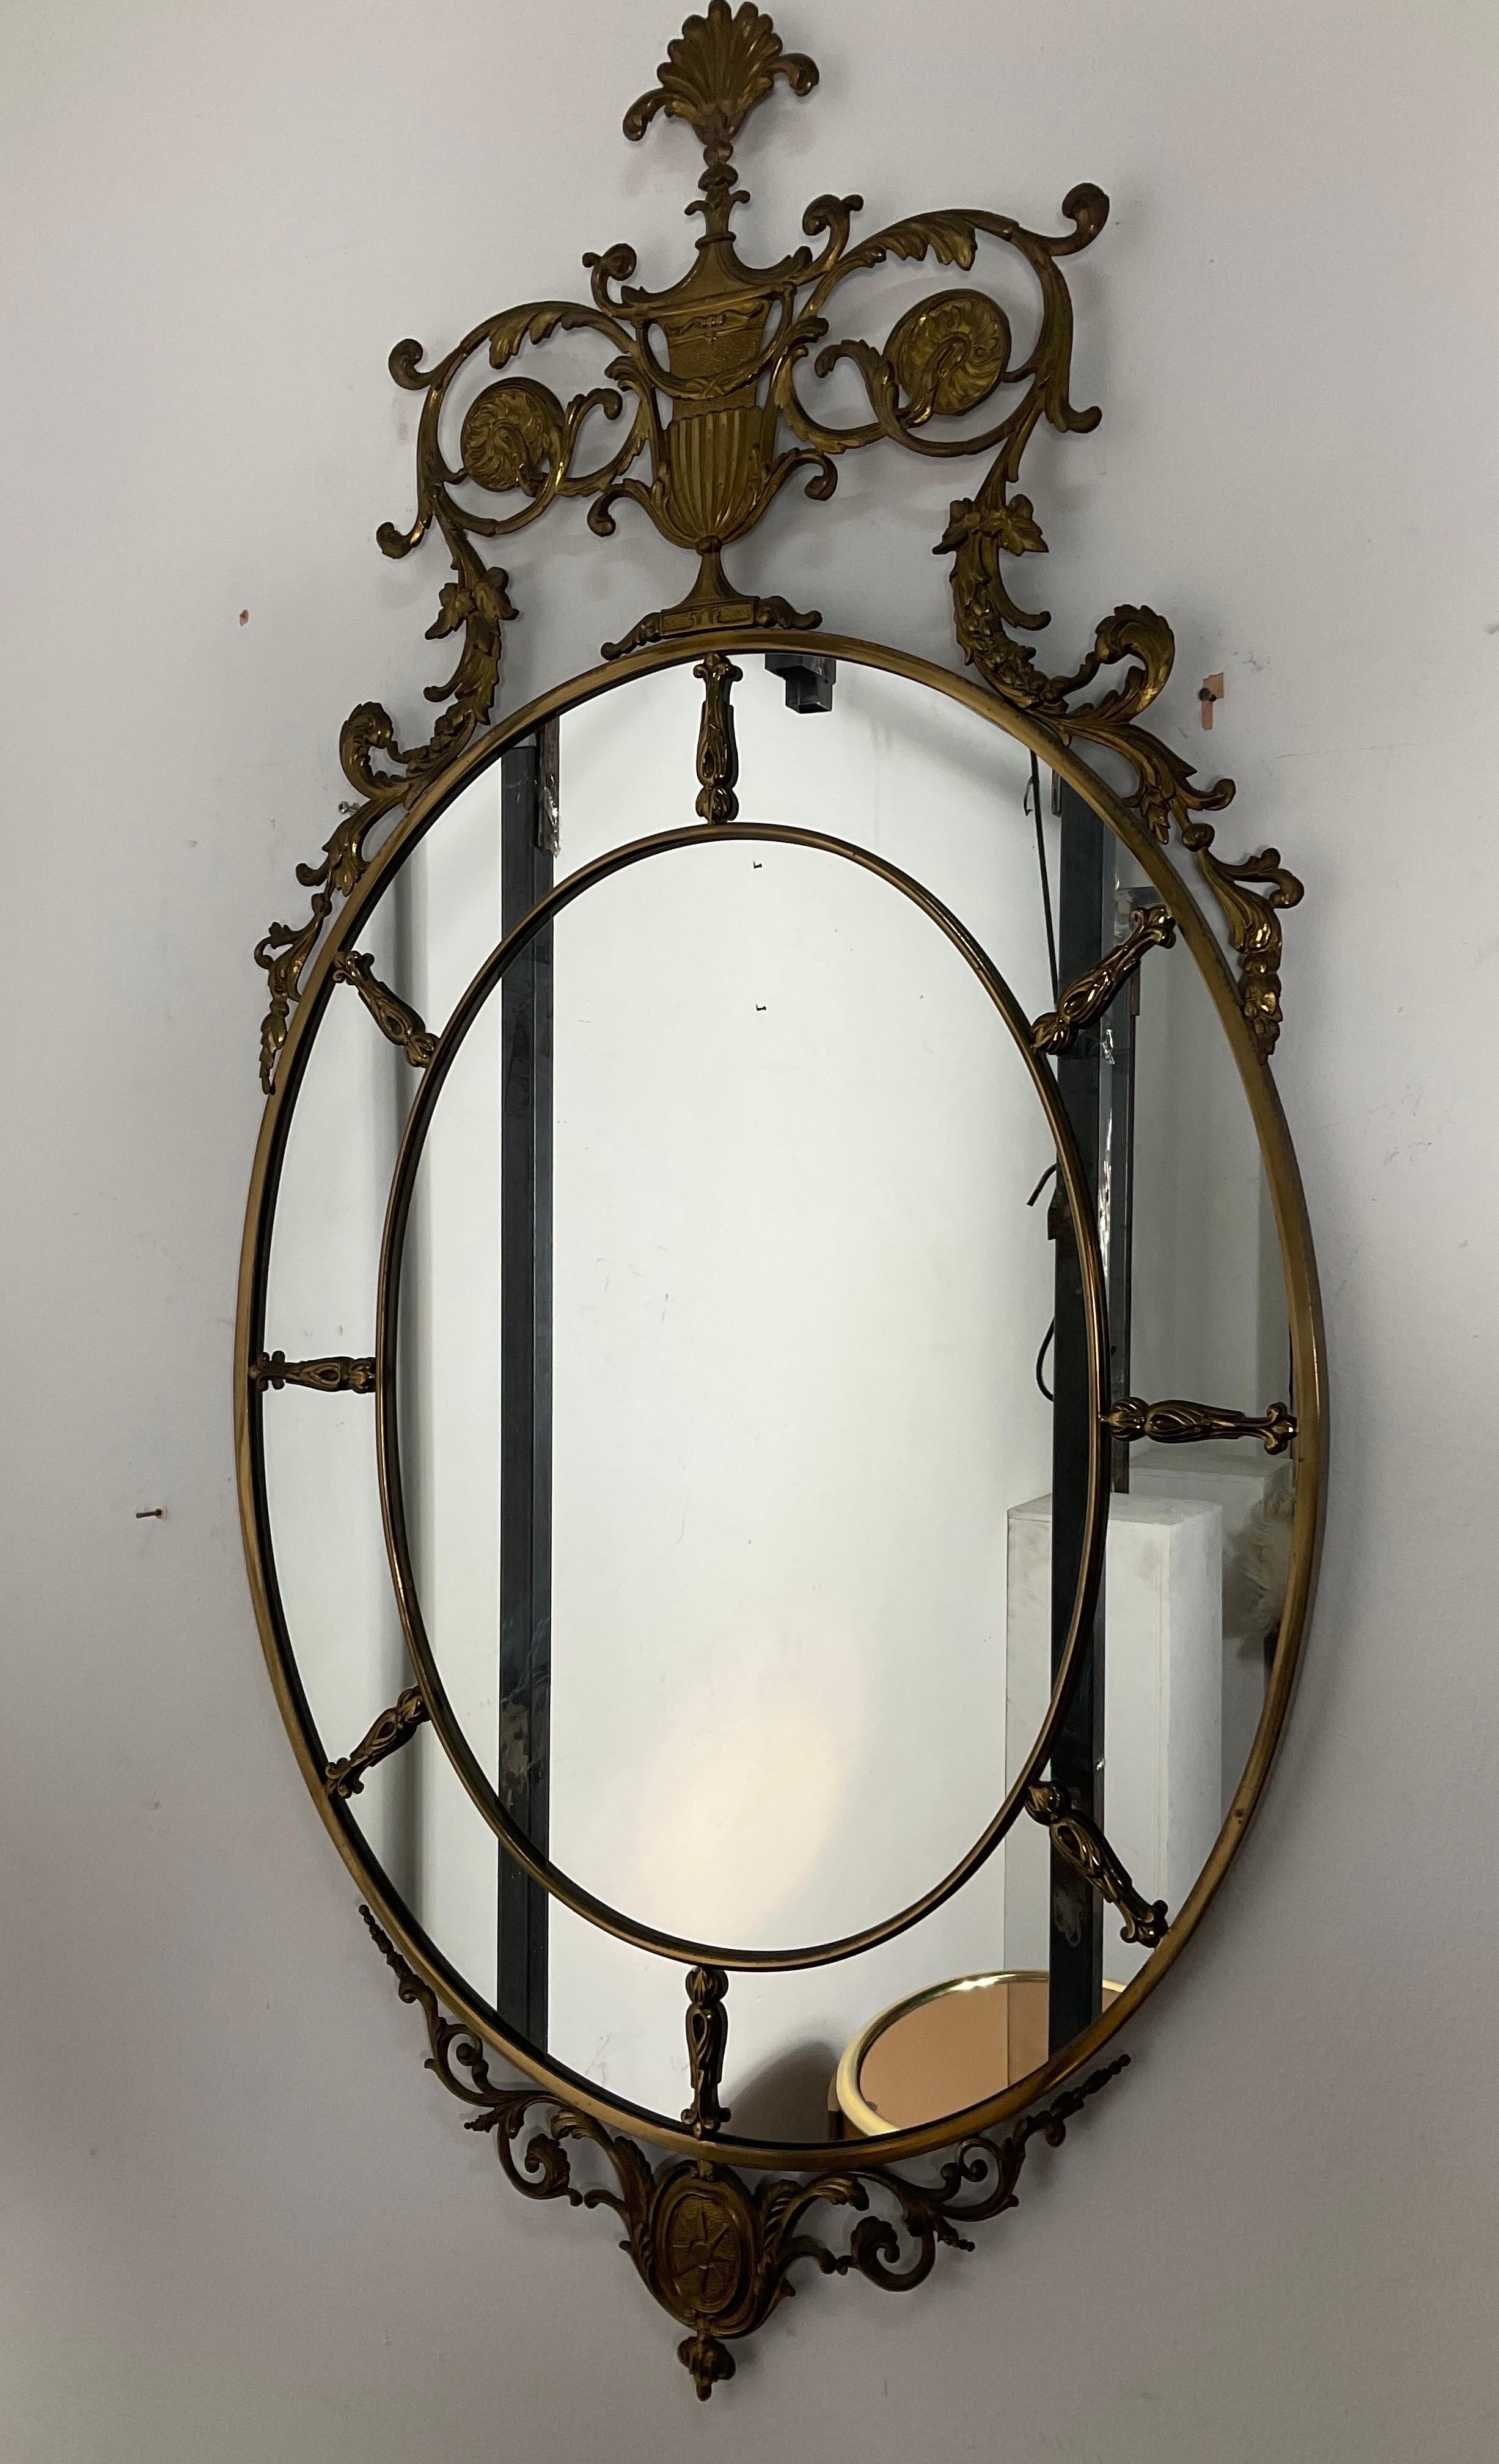 Brass mirror from the 60s Gio style bridges with finishes on the brass mirror and features a solid wood back surface. Gio Ponti has designed many objects in the most varied fields, from theatre sets, to lamps, to chairs, to kitchen objects, to the